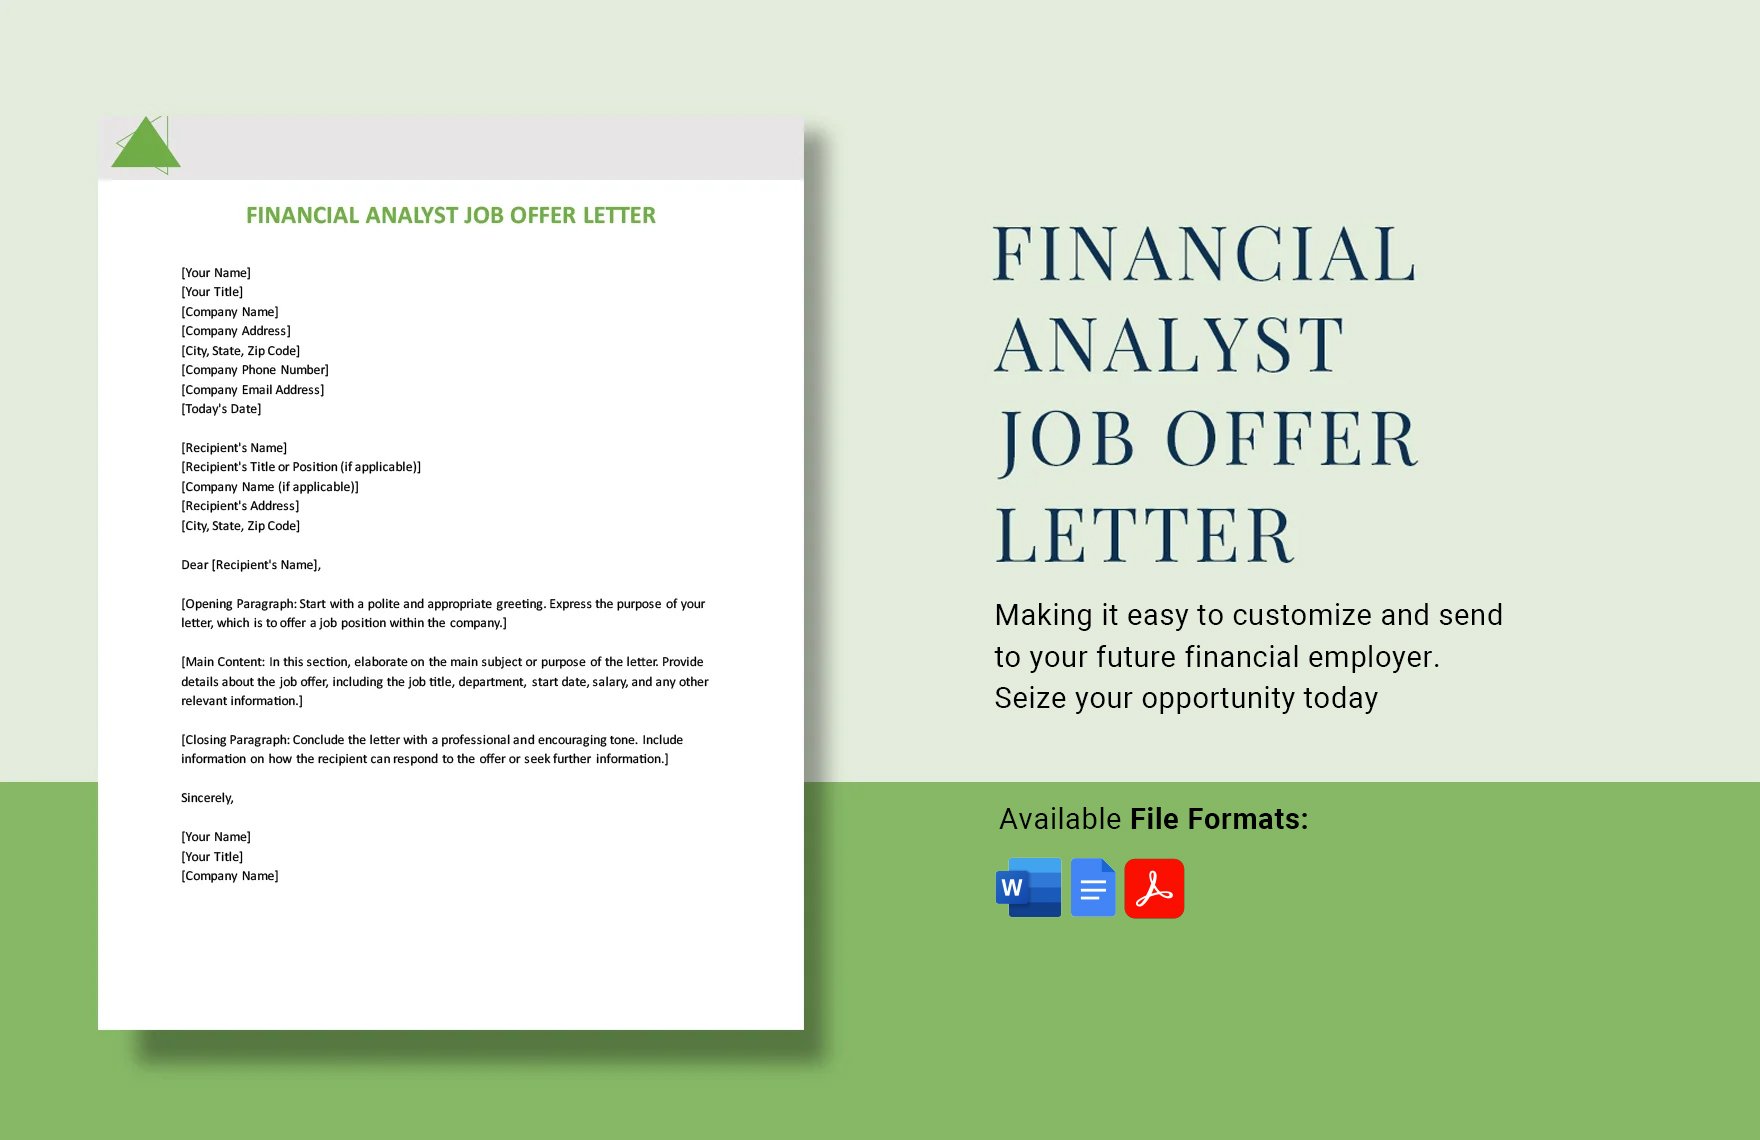 Financial Analyst Job Offer Letter in Word, Google Docs, PDF